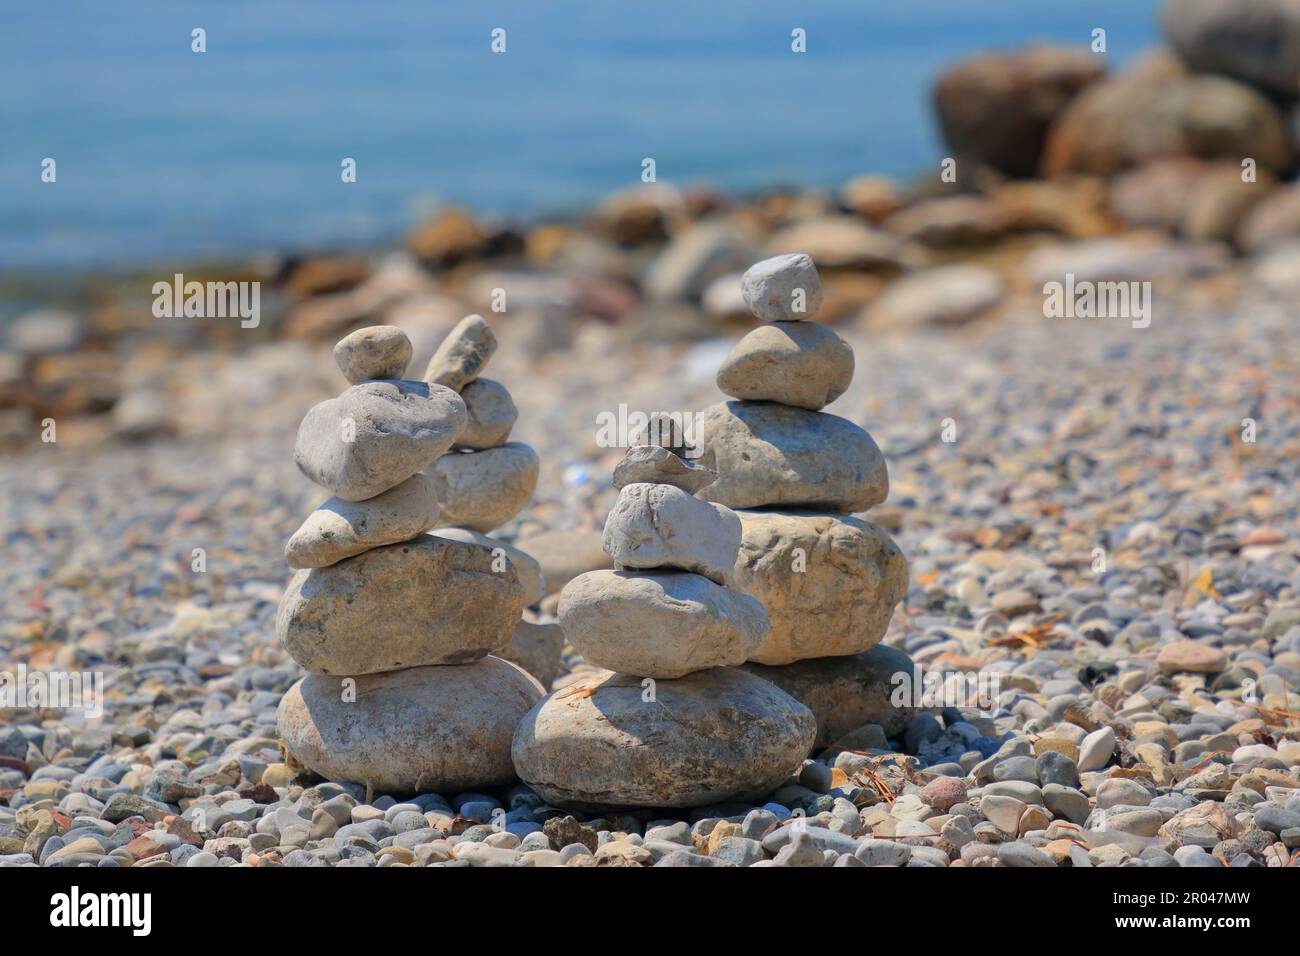 Large pebbles, collected as a composition a la 'Stonehenge' on Lake Garda for the opening of the beach season. Stock Photo